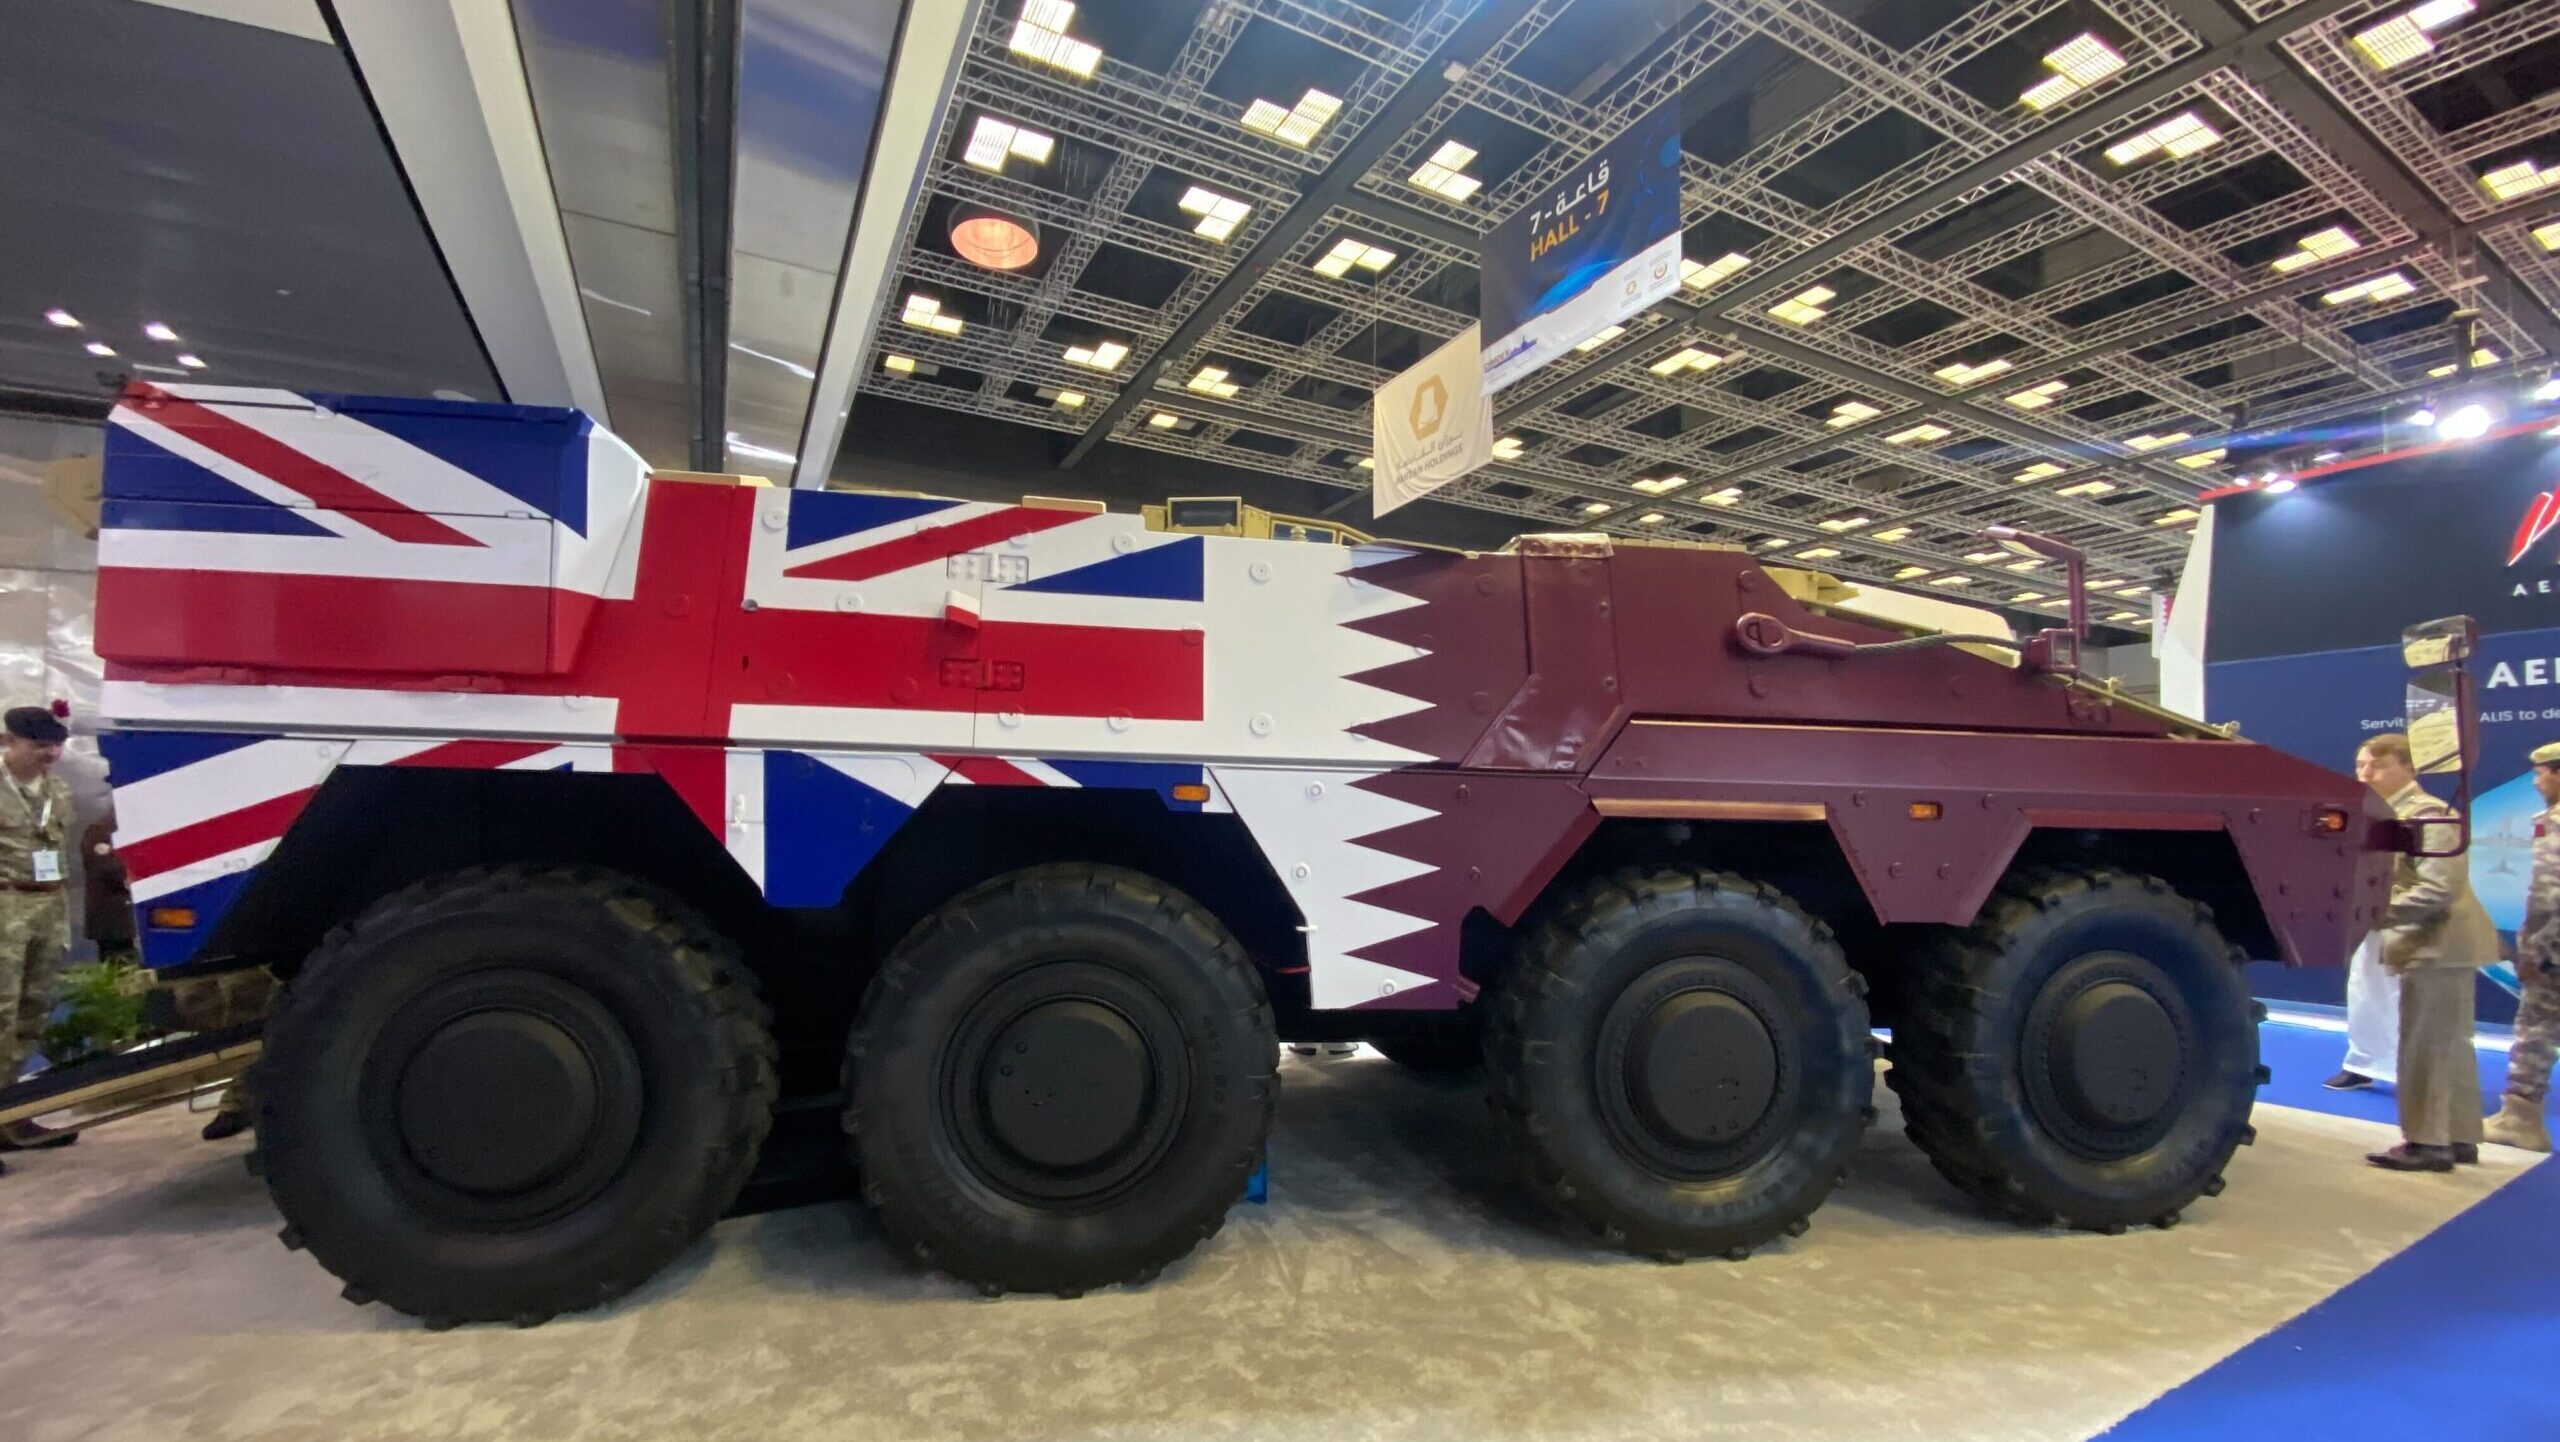 In-house rivalry: Boxer, VBCI armored vehicles compete for Qatari attention at DIMDEX